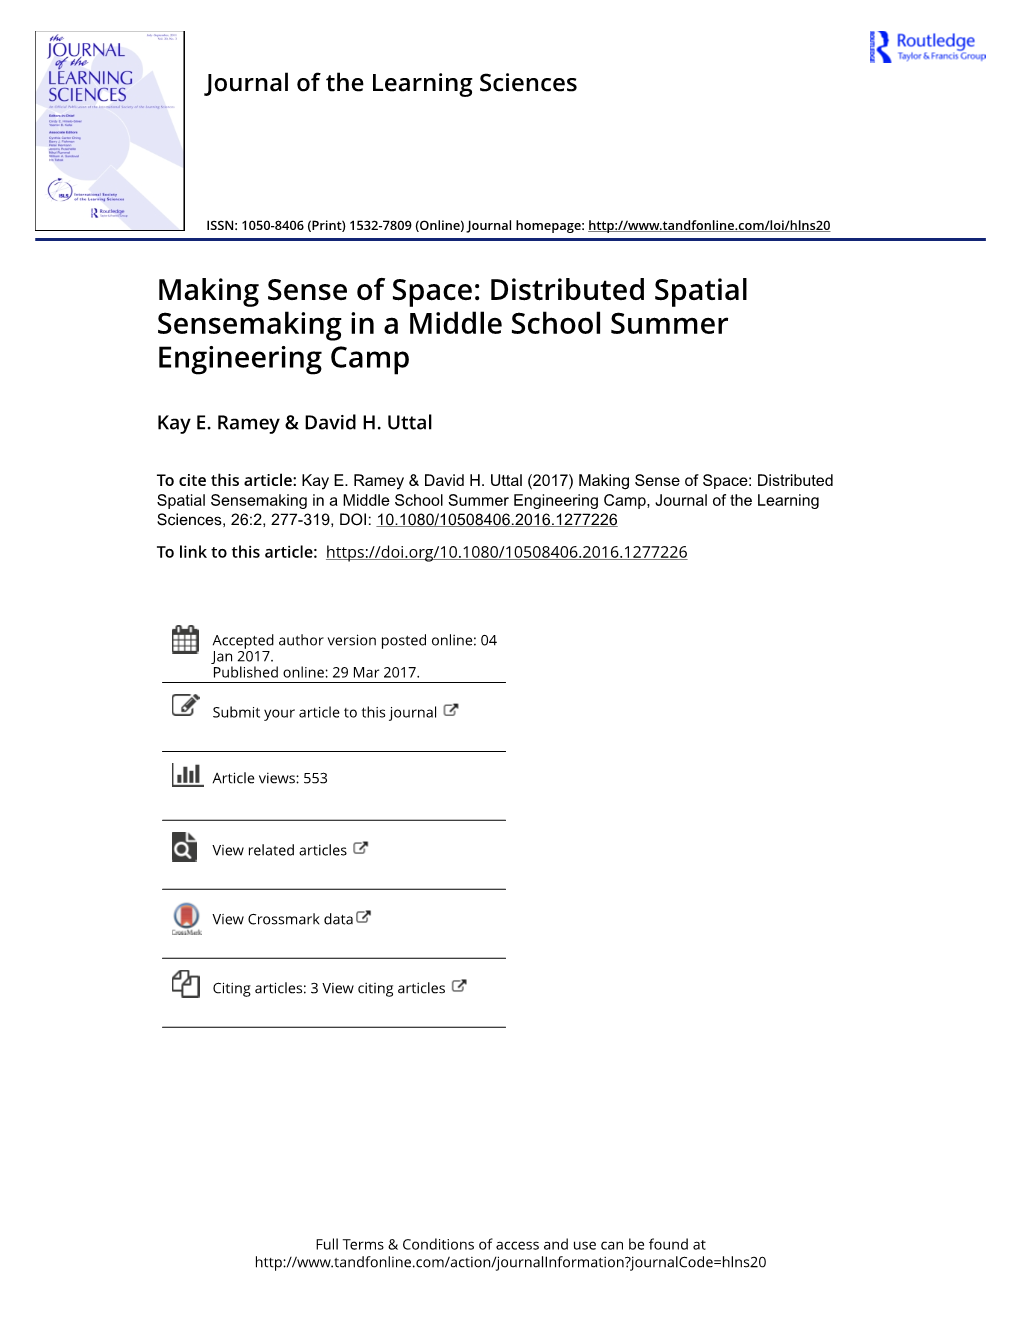 Making Sense of Space: Distributed Spatial Sensemaking in a Middle School Summer Engineering Camp